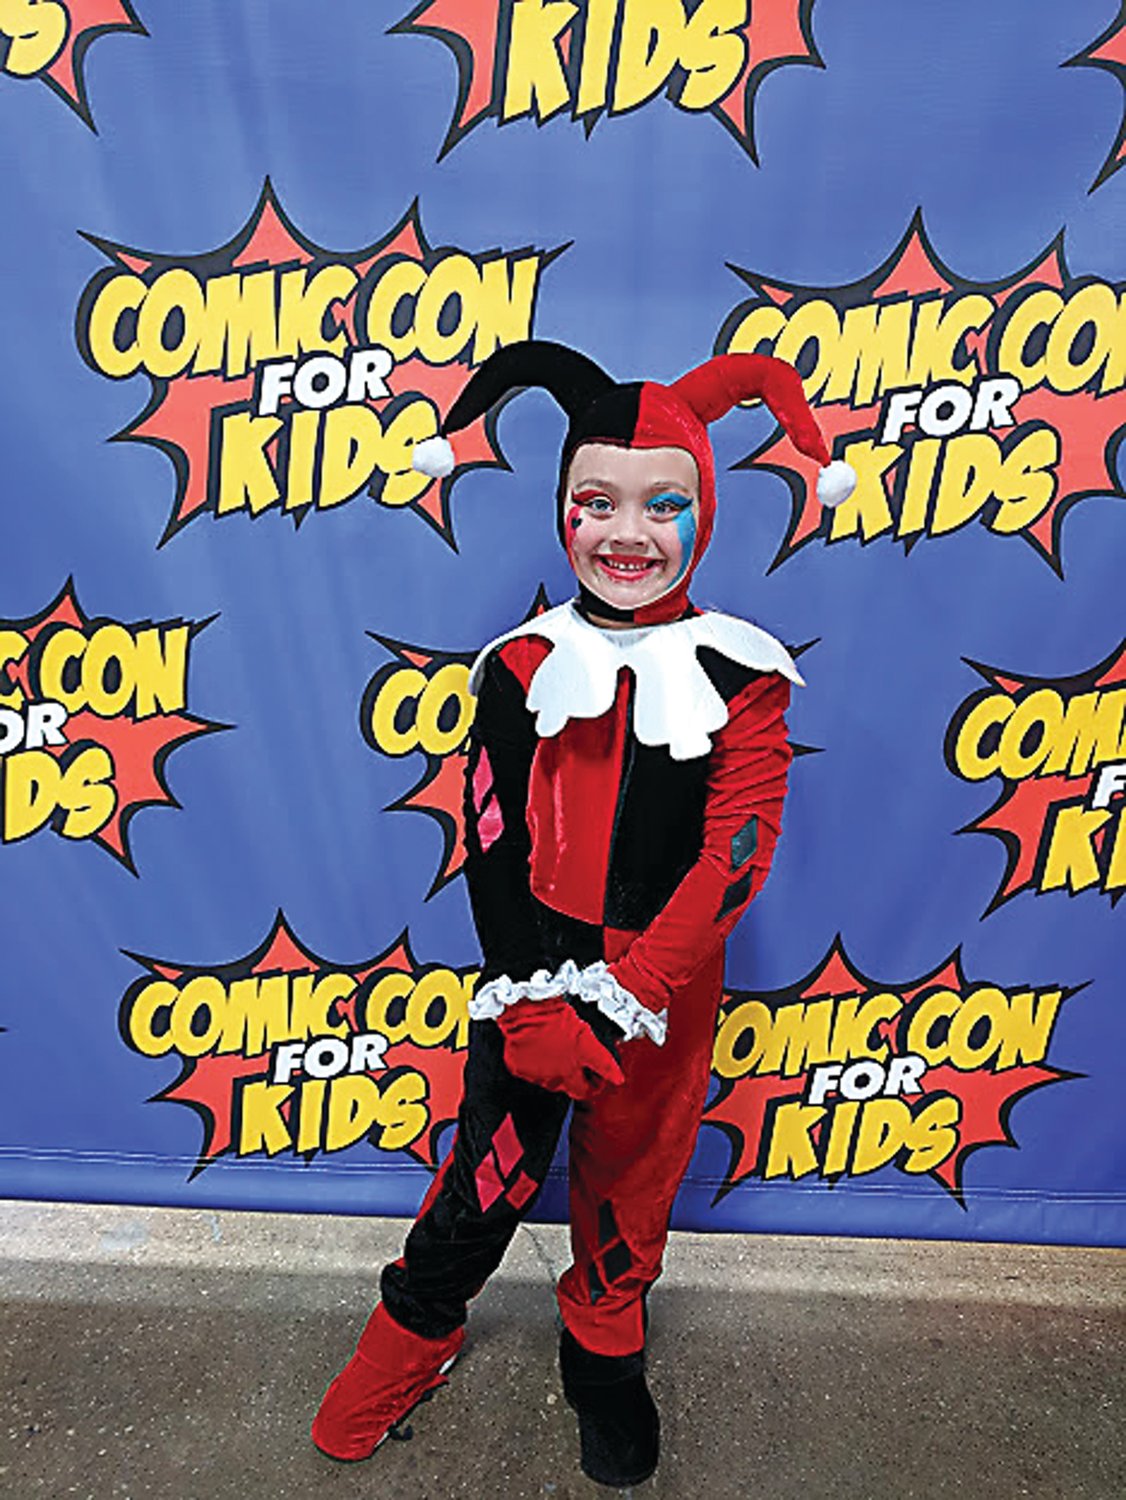 Created by Bucks County businessmen, Comic Con for Kids launches in Oaks.